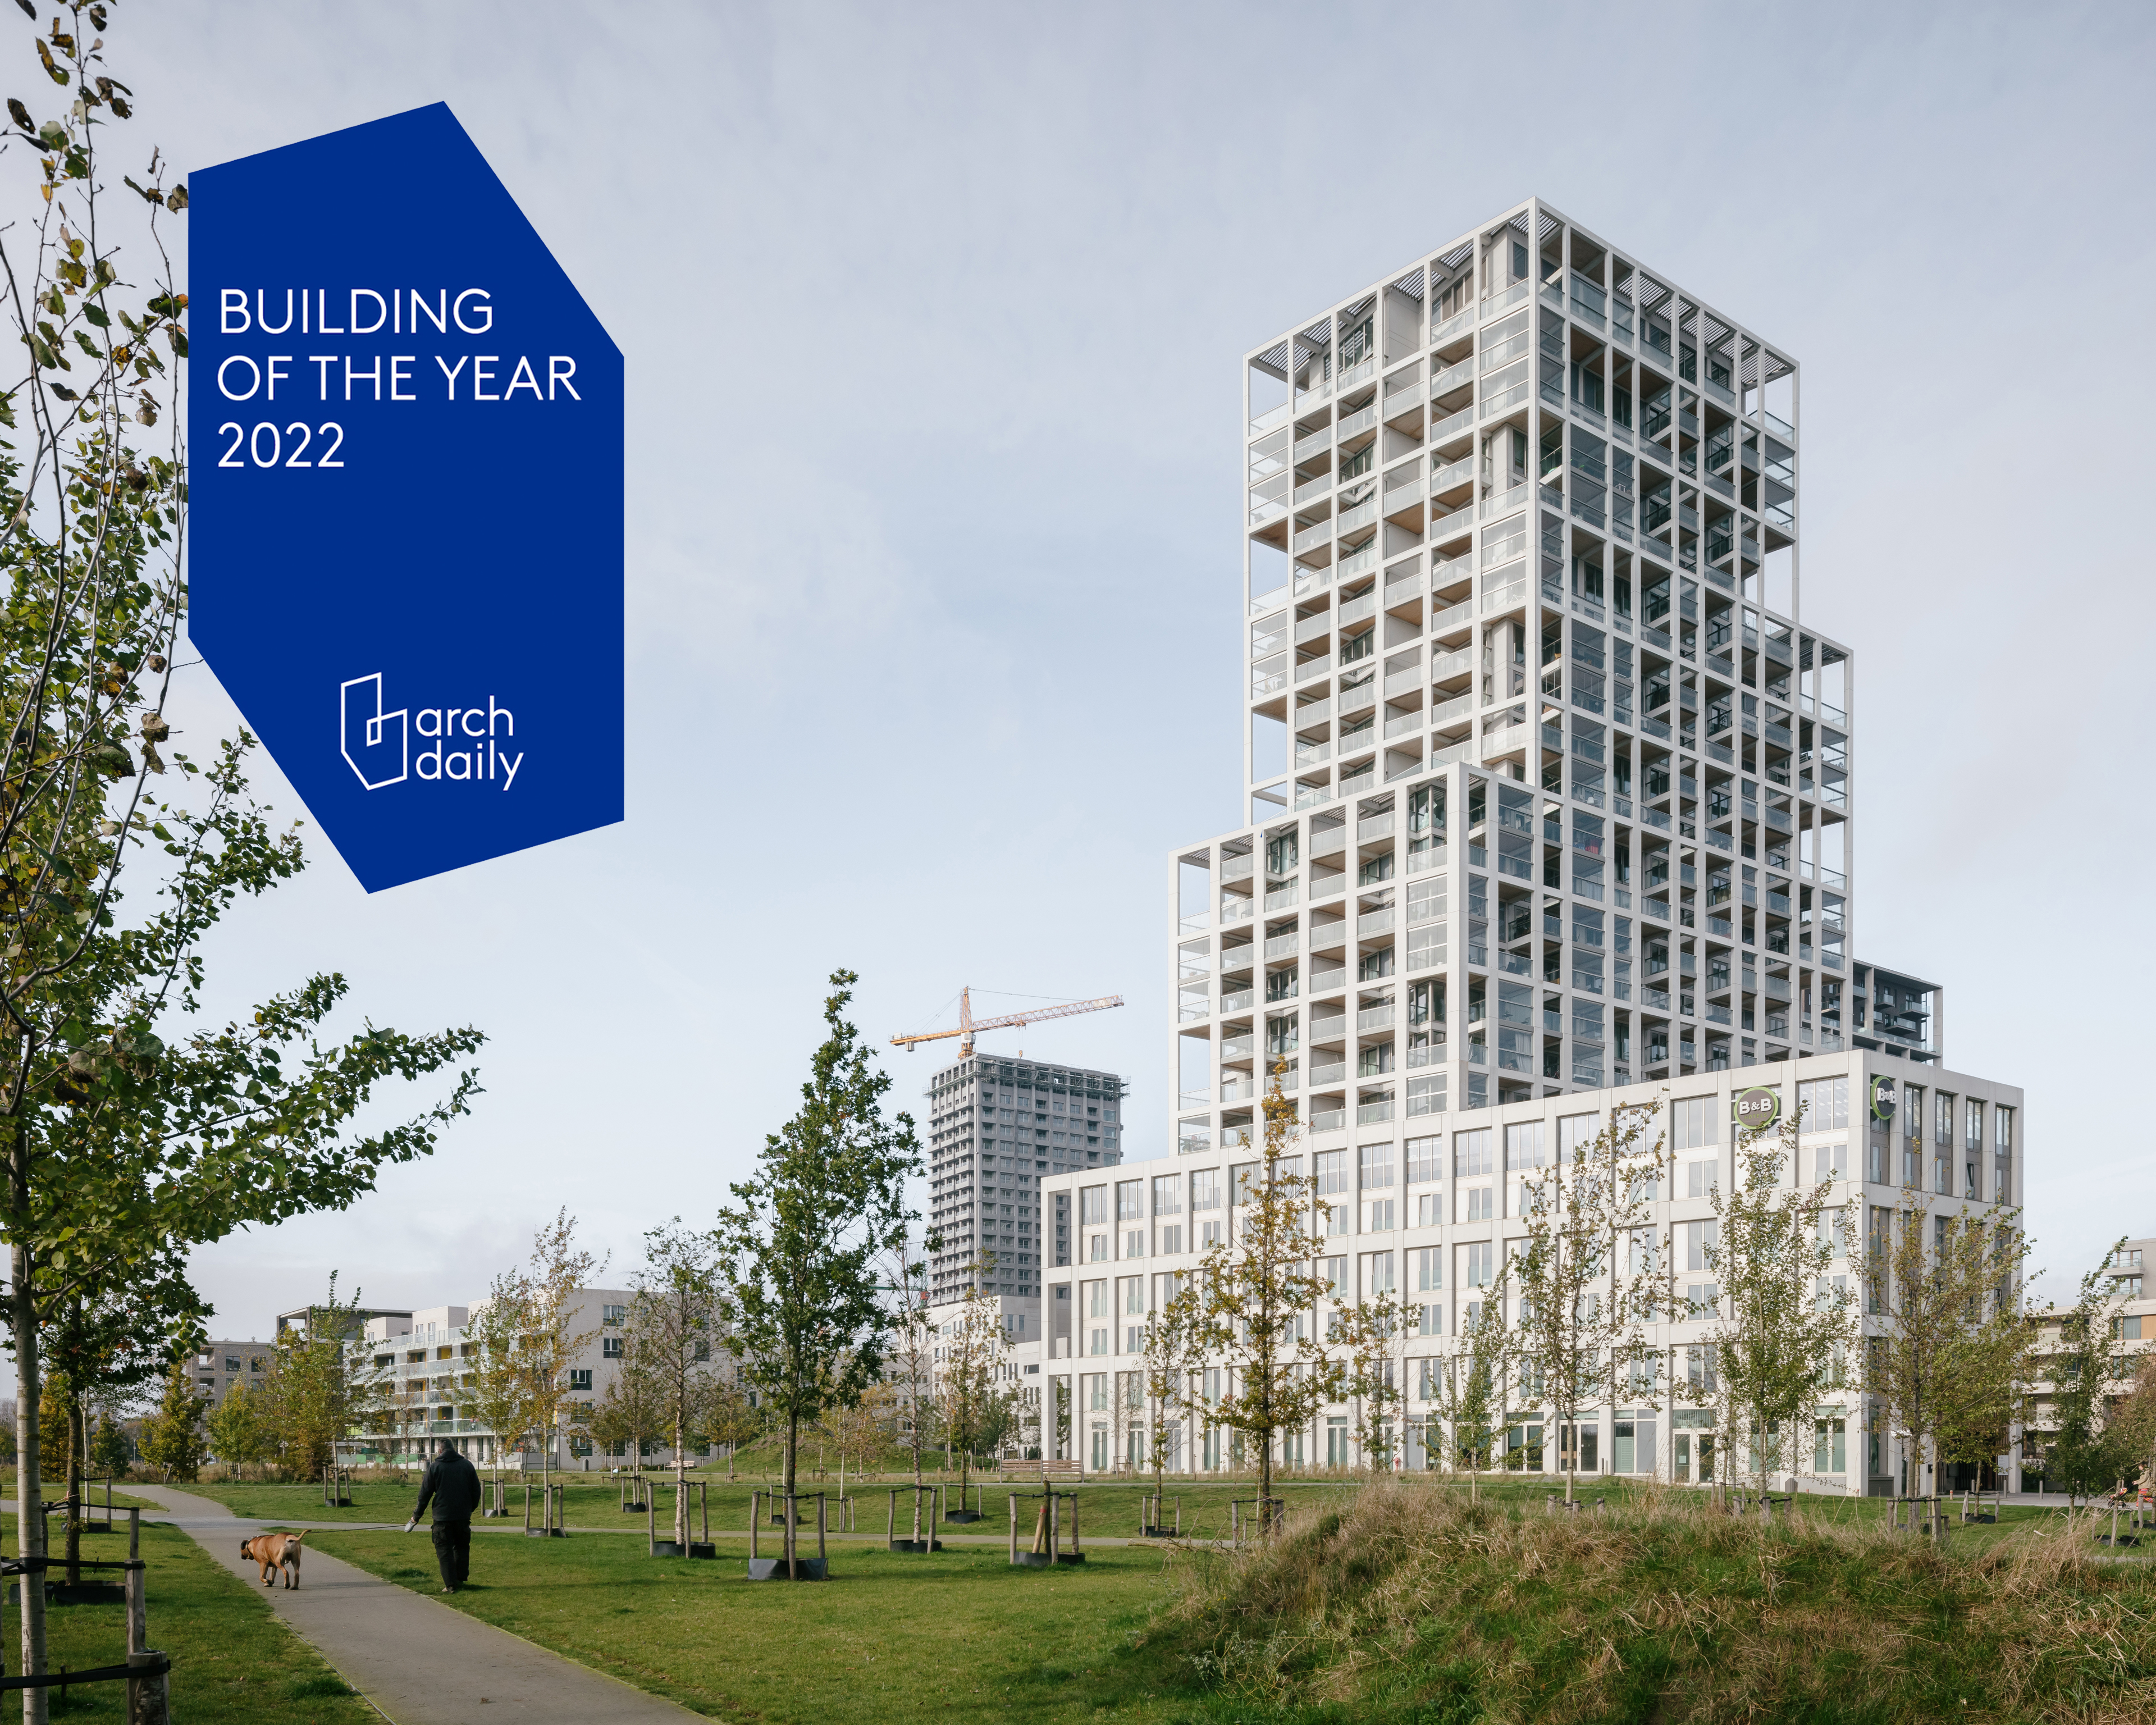 Zuiderzicht nominated for ArchDaily’s 'Building of the Year'